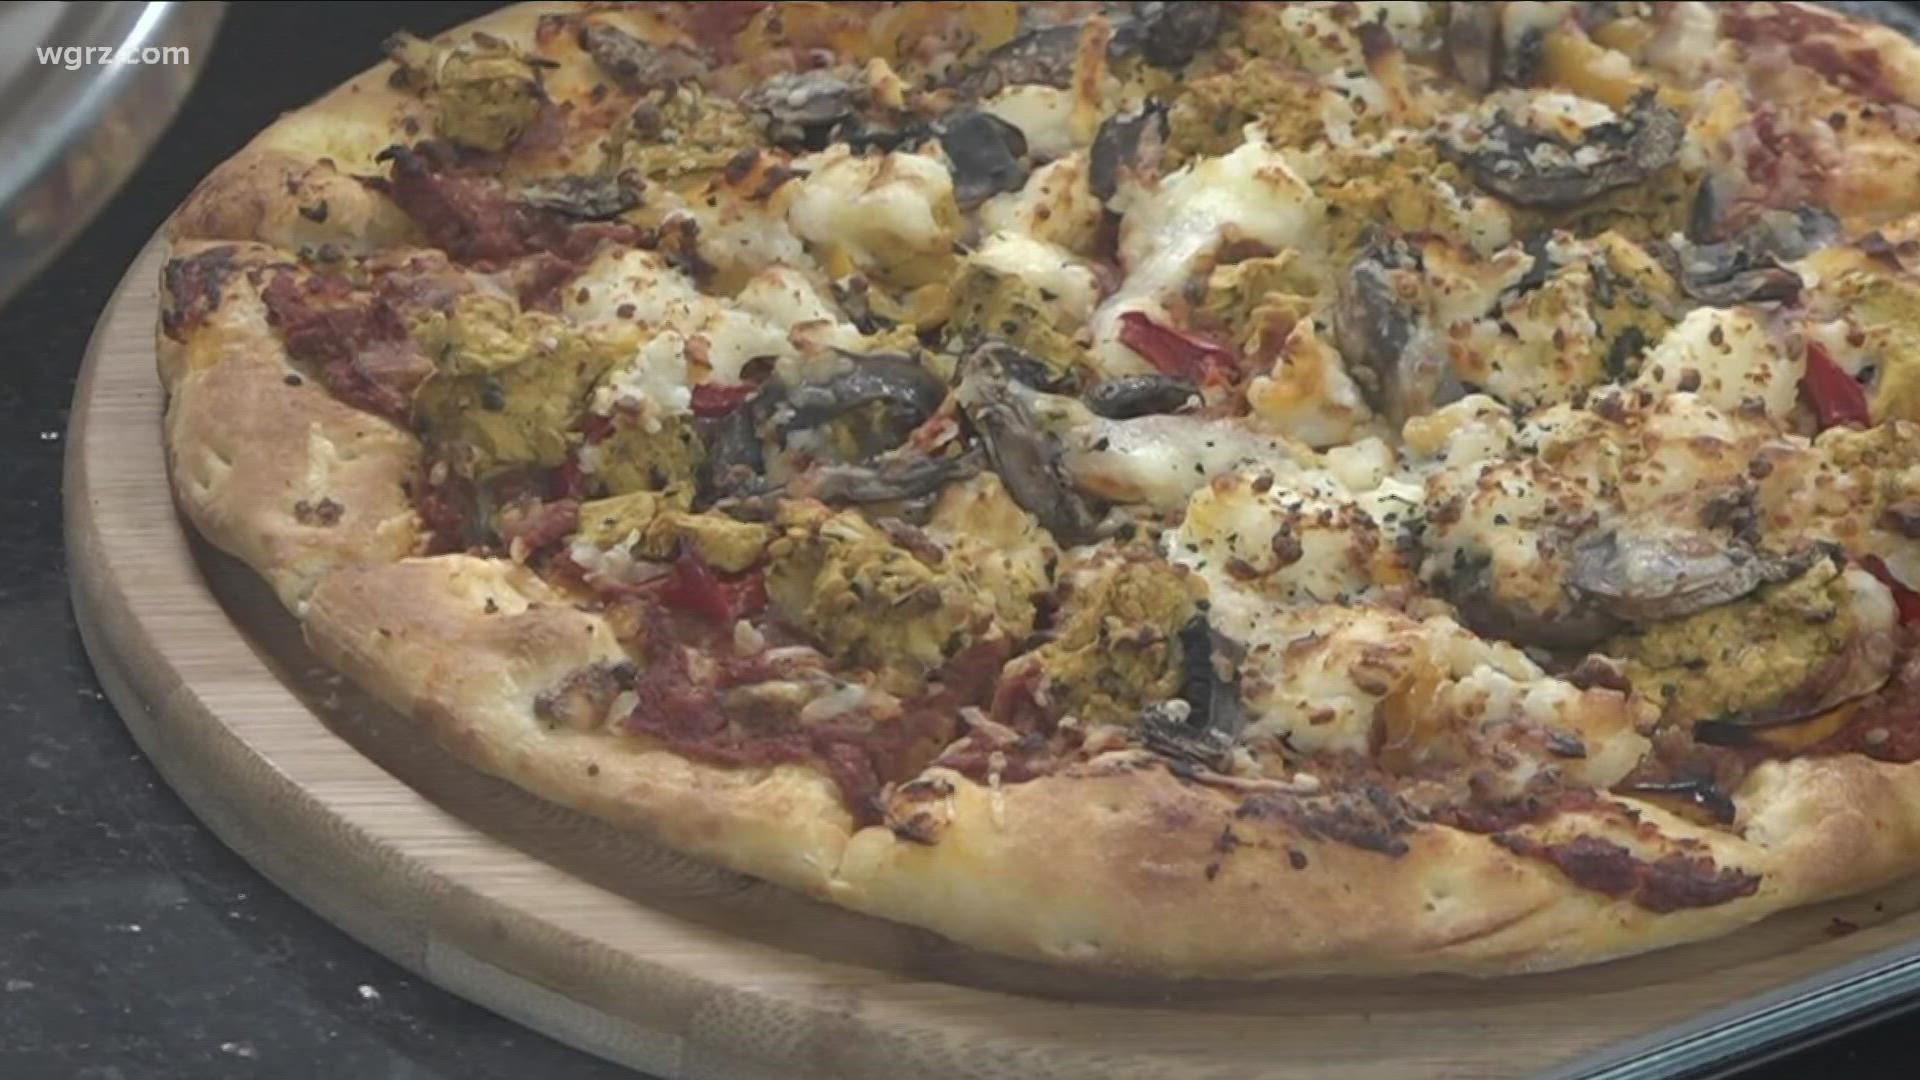 State officials are considering if they should allow pizzerias and other restaurants to sell cannabis-infused food and packaged edibles